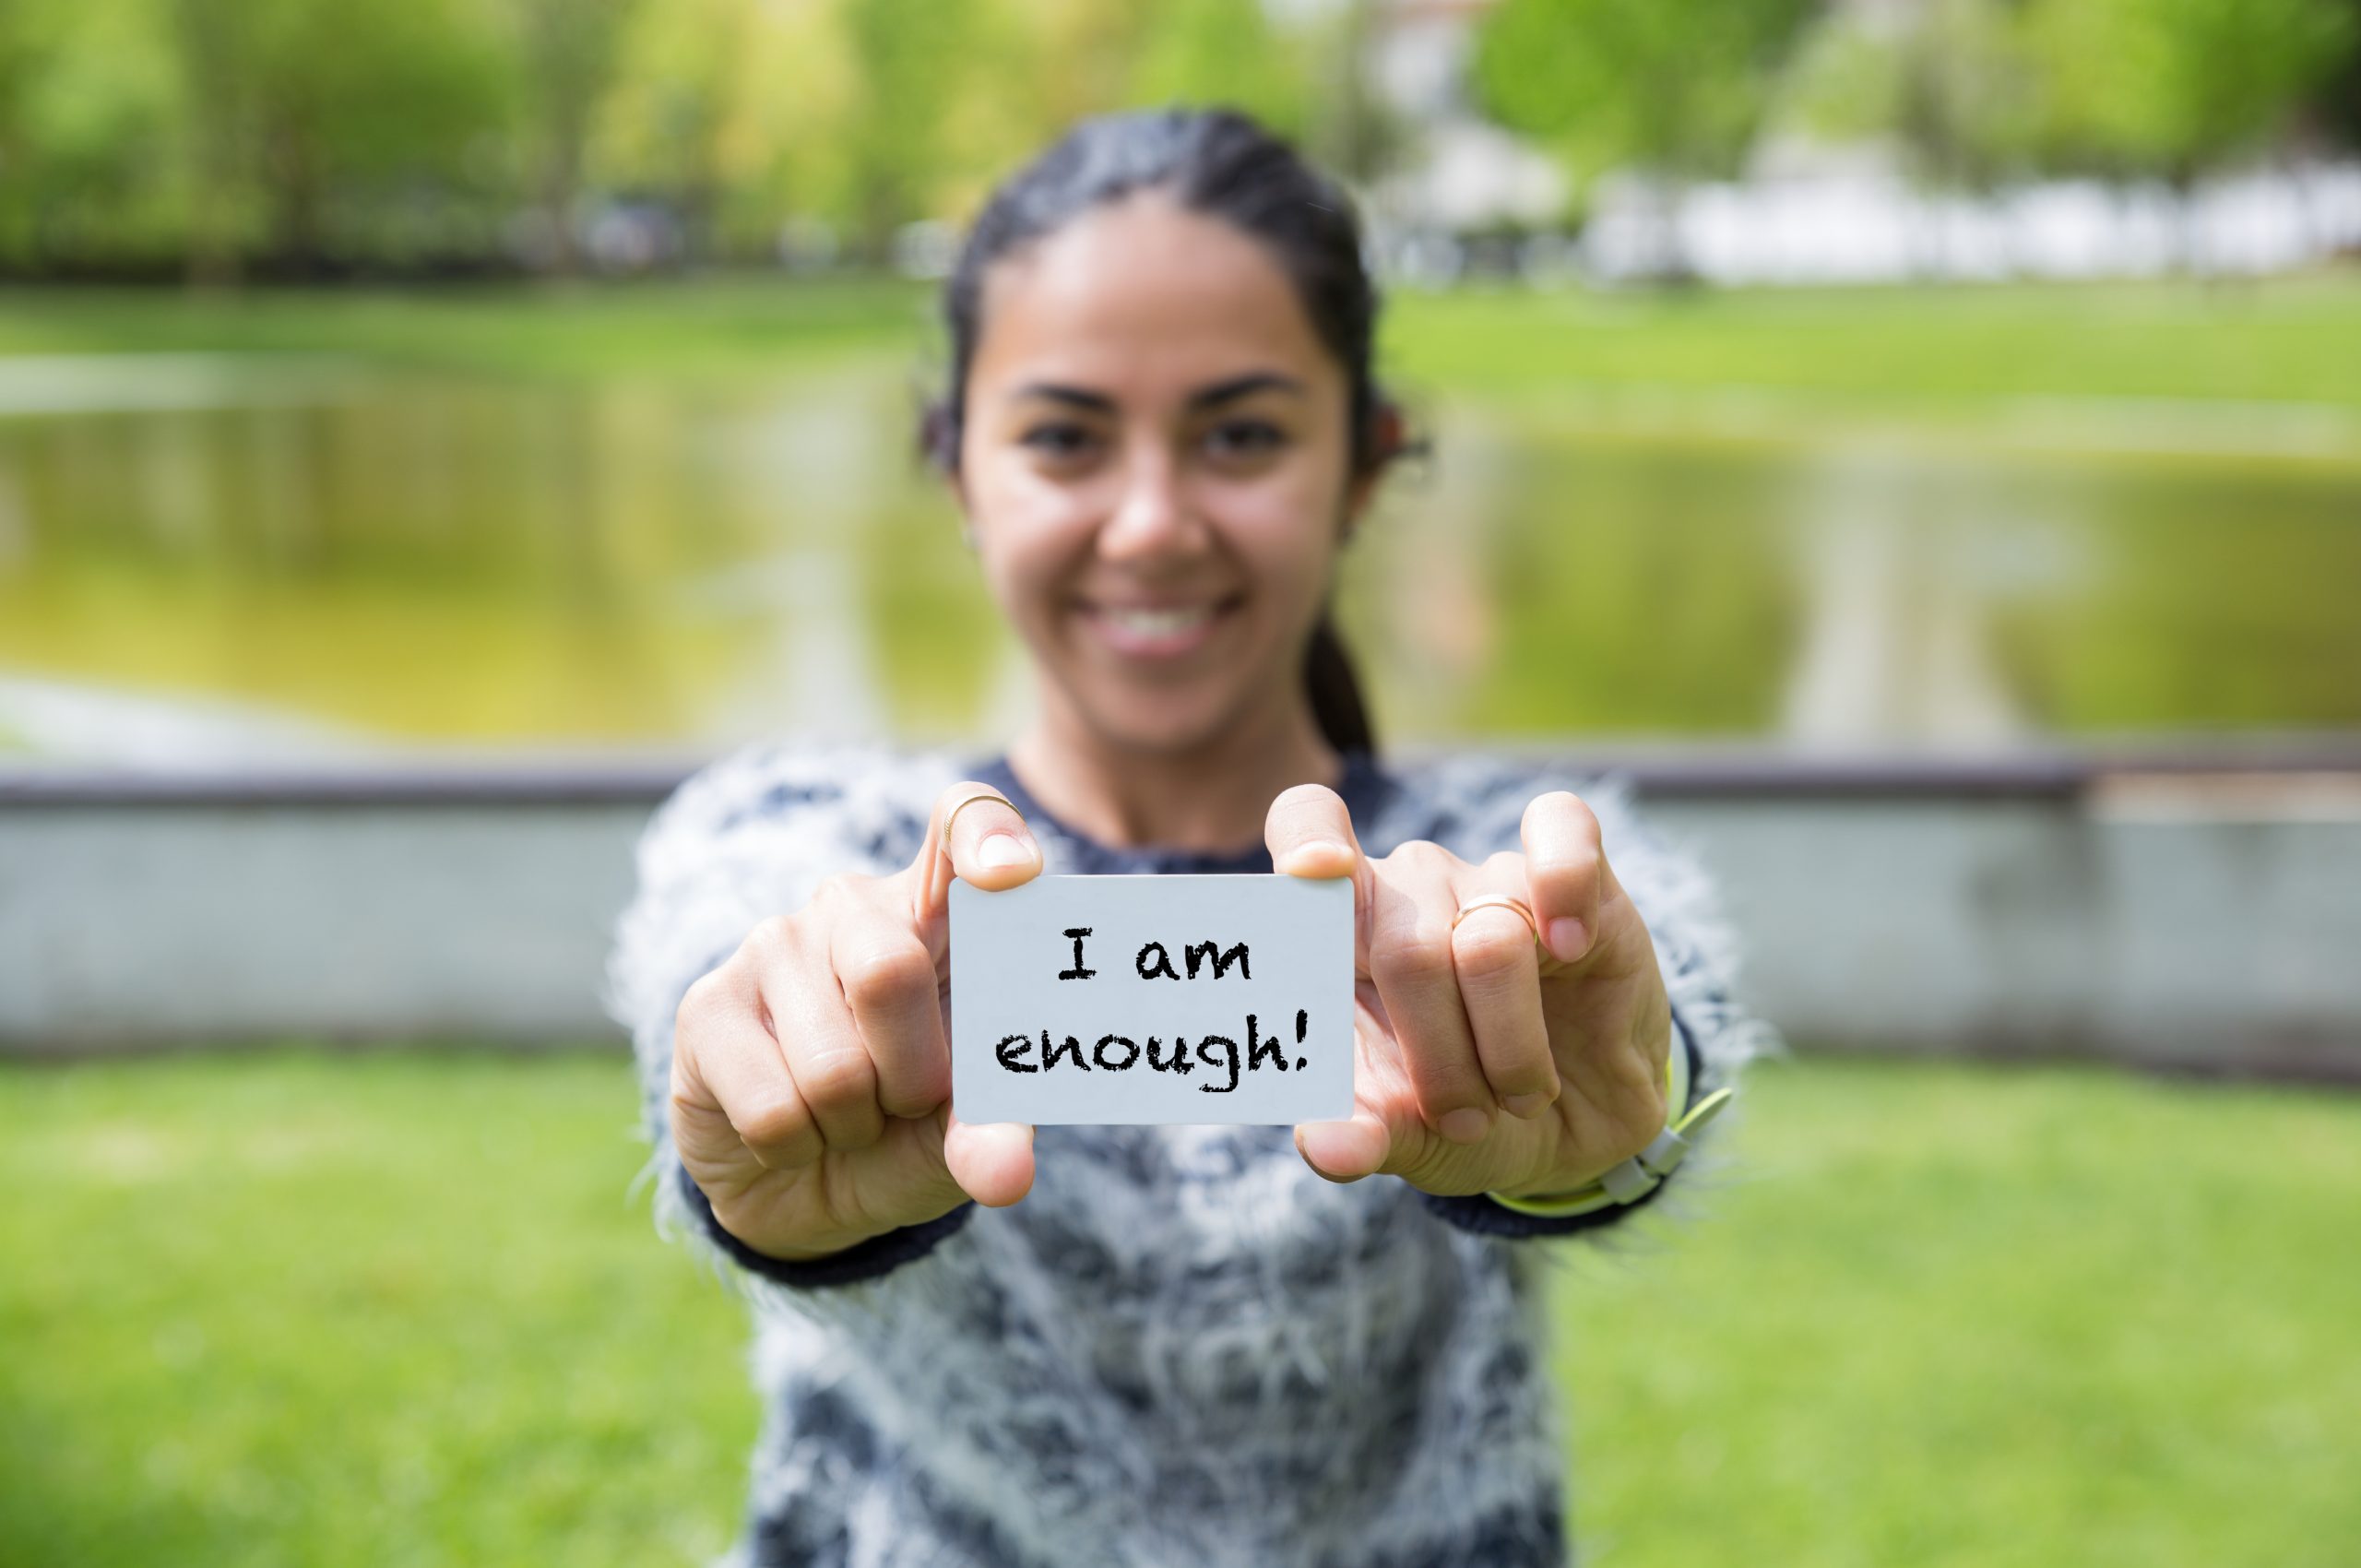 Smiling young woman showing "I am enough" at the park